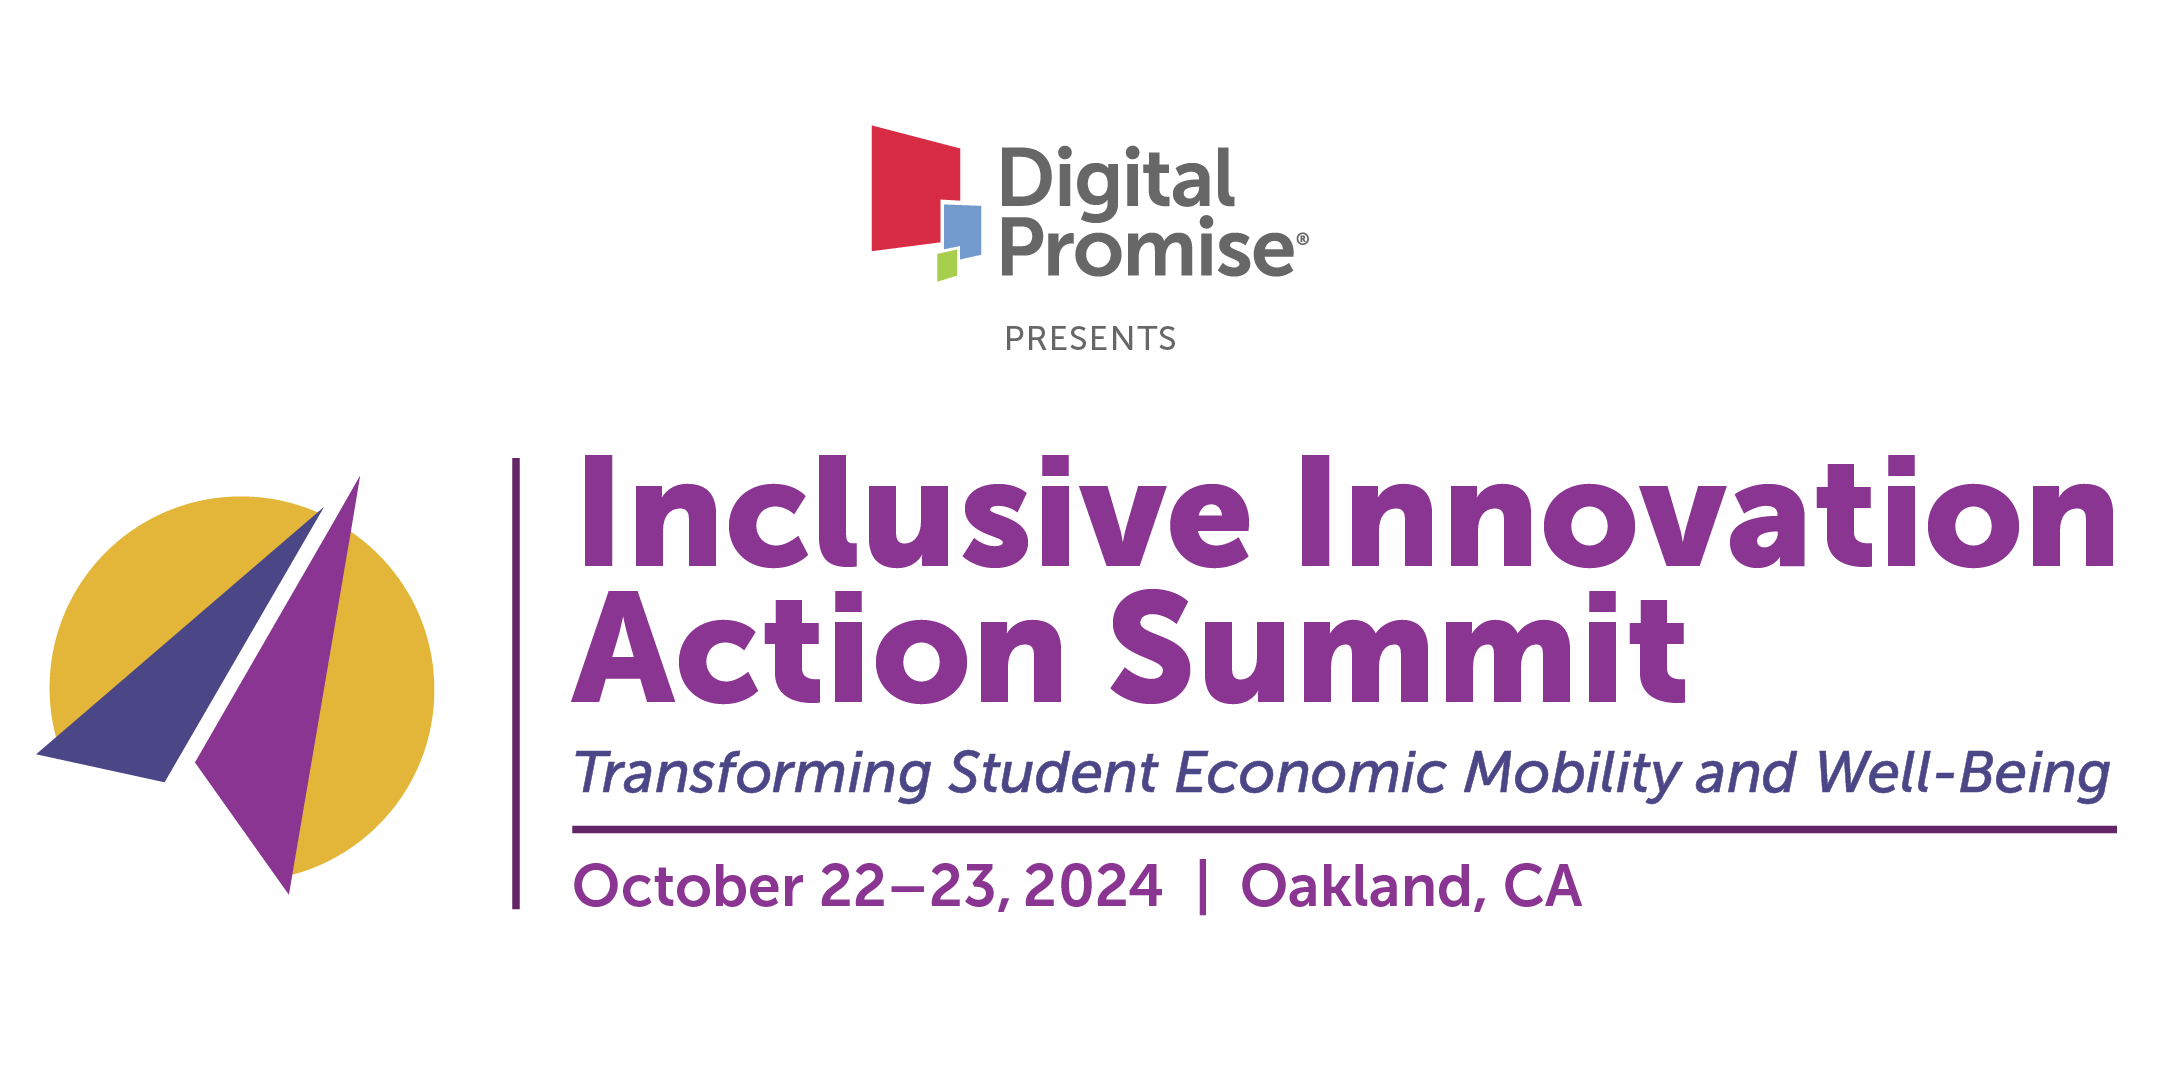 The Inclusive Innovation Action Summit logo and event information.